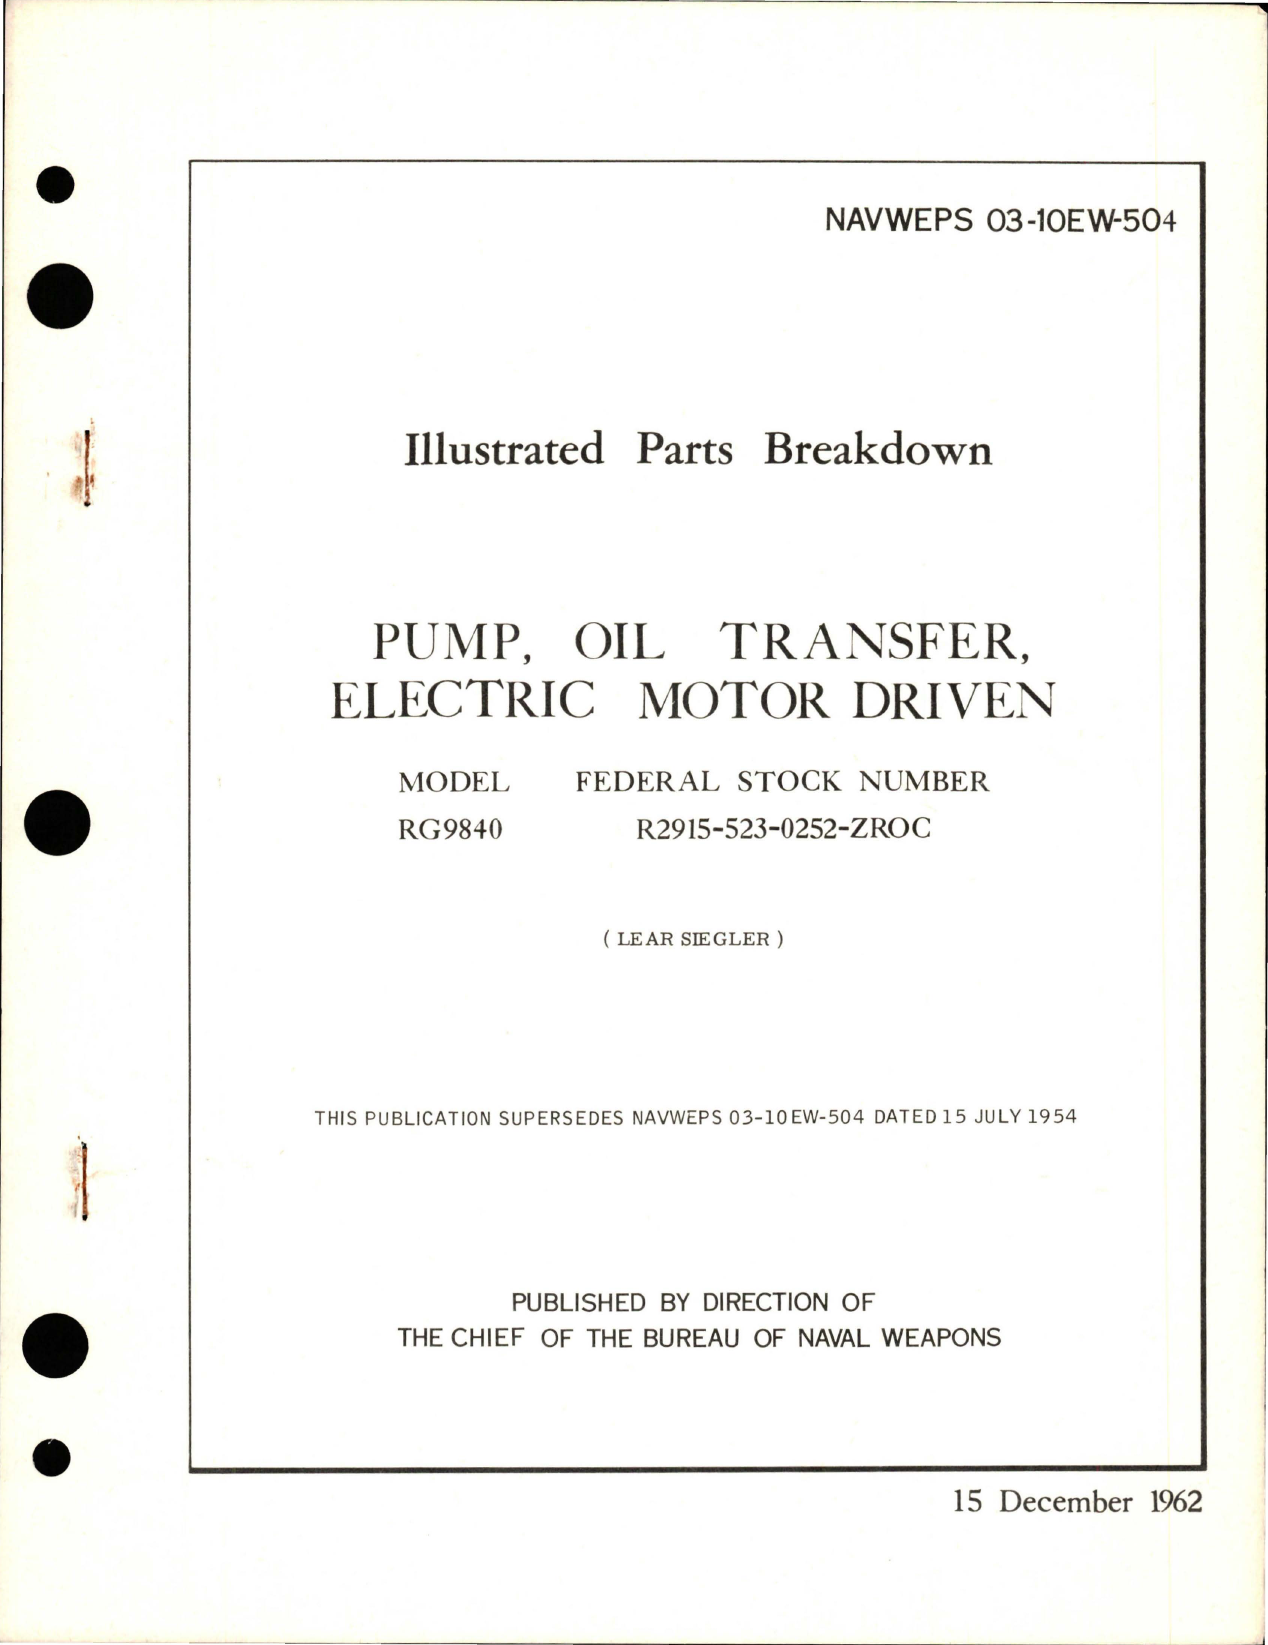 Sample page 1 from AirCorps Library document: Illustrated Parts Breakdown for Electric Motor Driven Oil Transfer Pump - Model RG9840